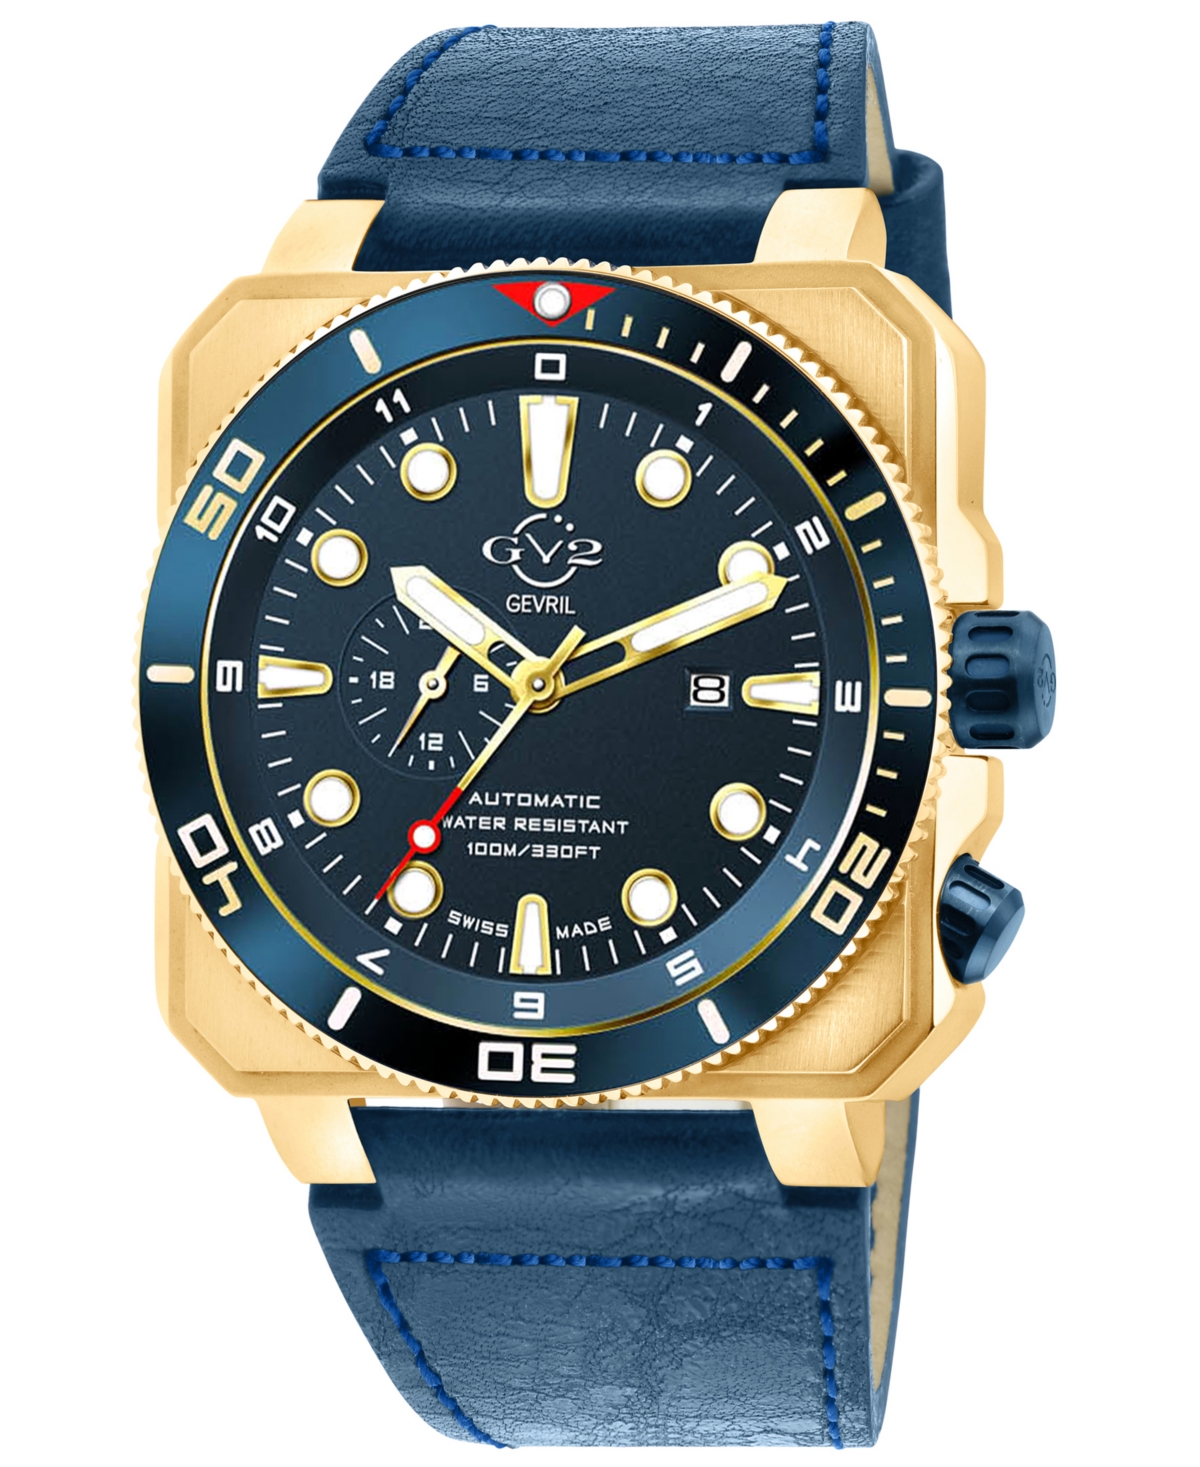 Men's Xo Submarine Swiss Automatic Navy Leather Watch 44mm - Gold